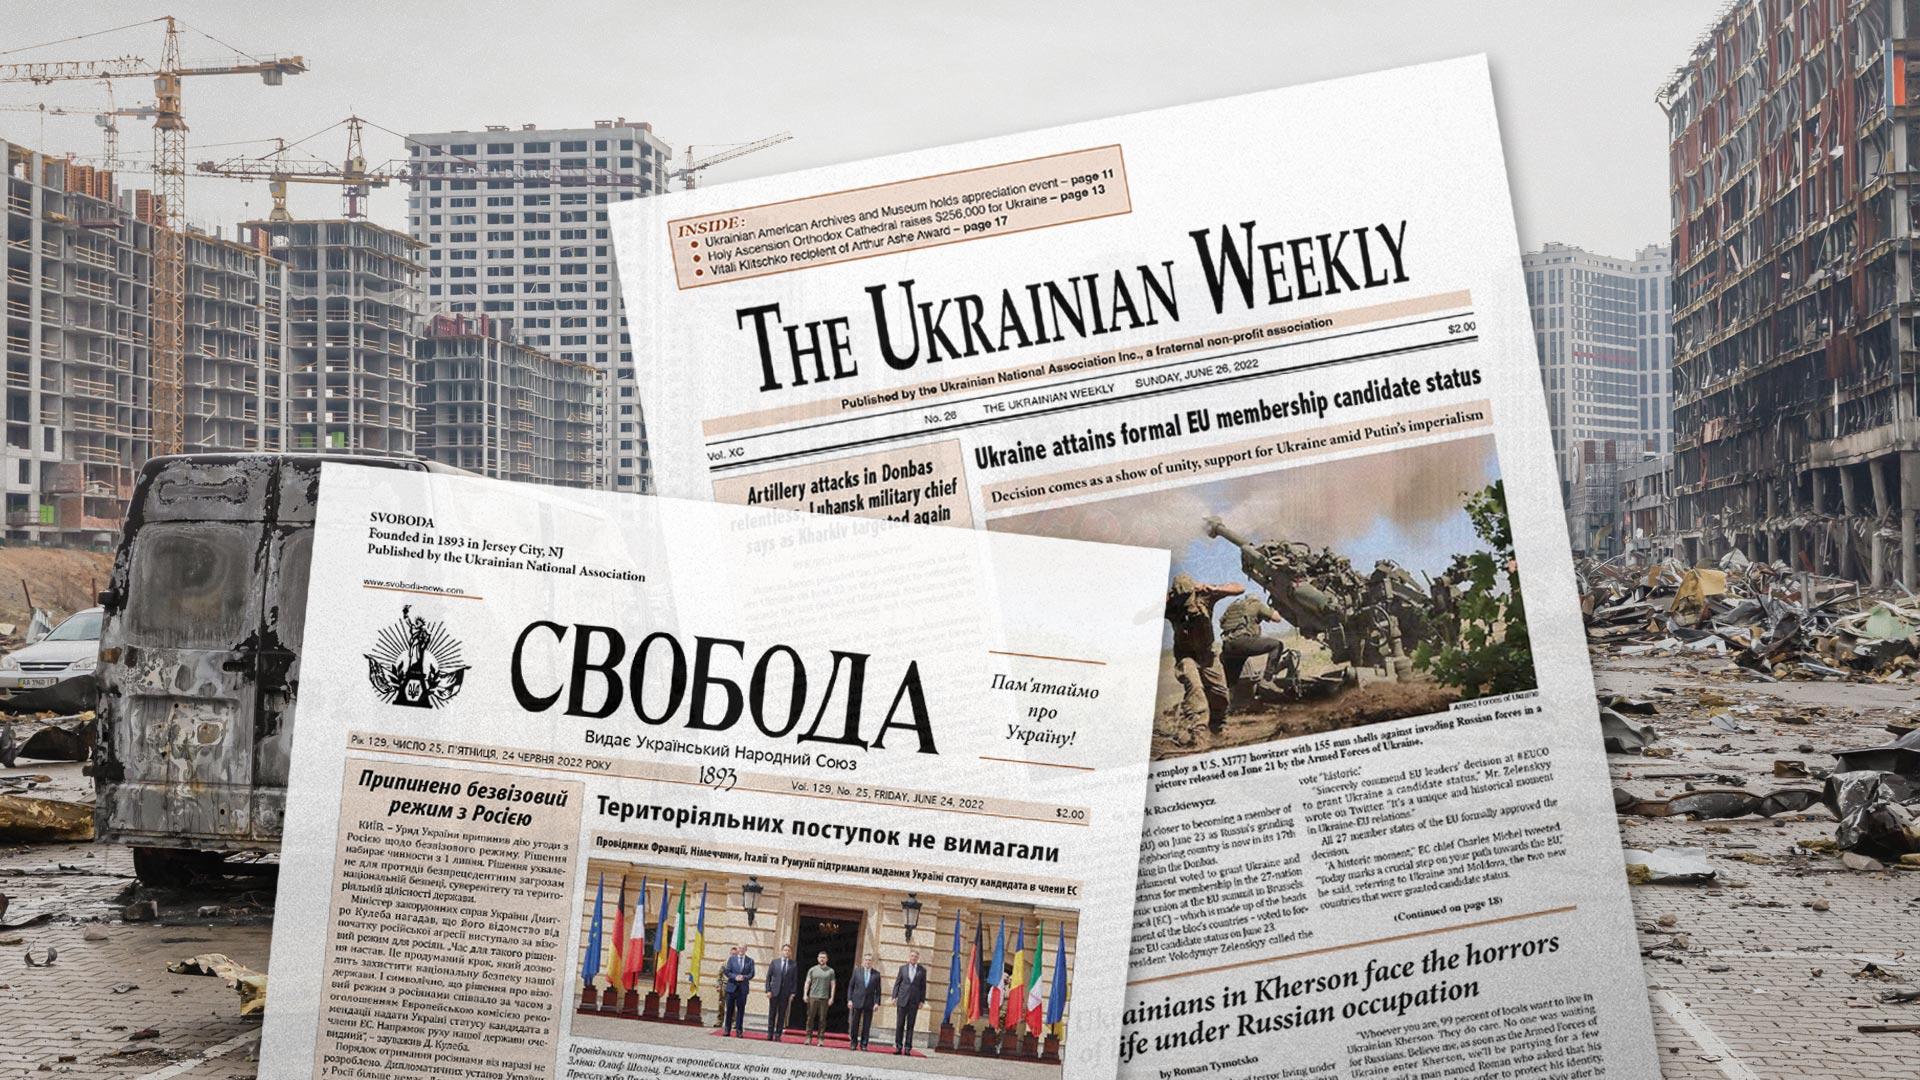 Ukrainian newspapers in front of an image of war torn Ukraine. Collage by Valerie Morgan; background image by Shutterstock